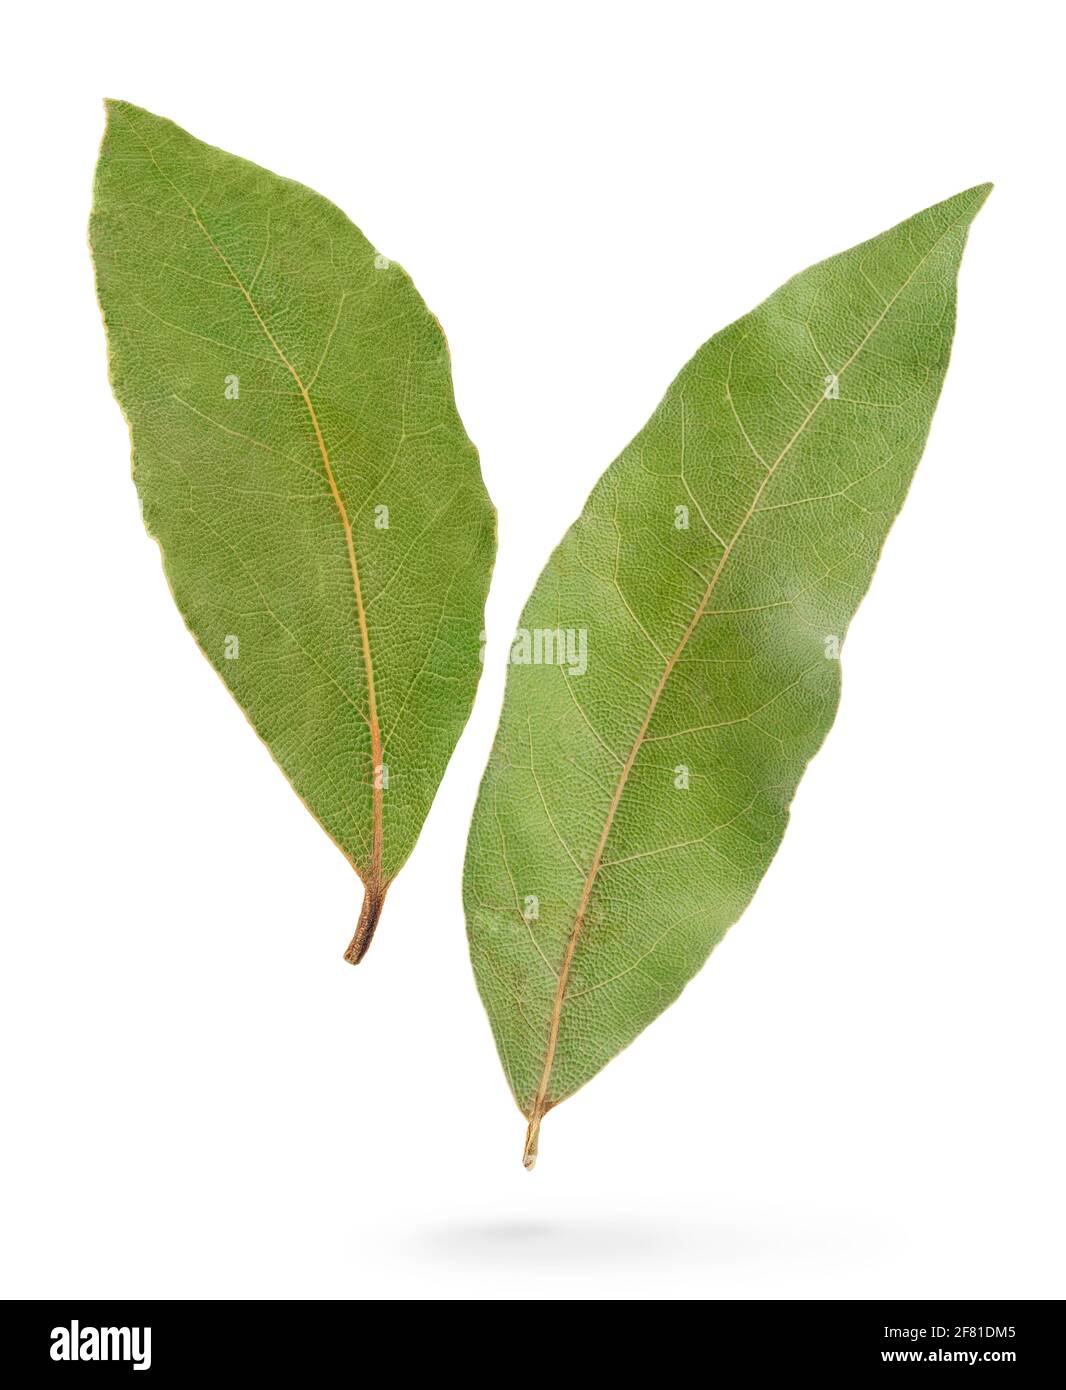 Two bay leaves isolated with clipping path on white background. Stock Photo